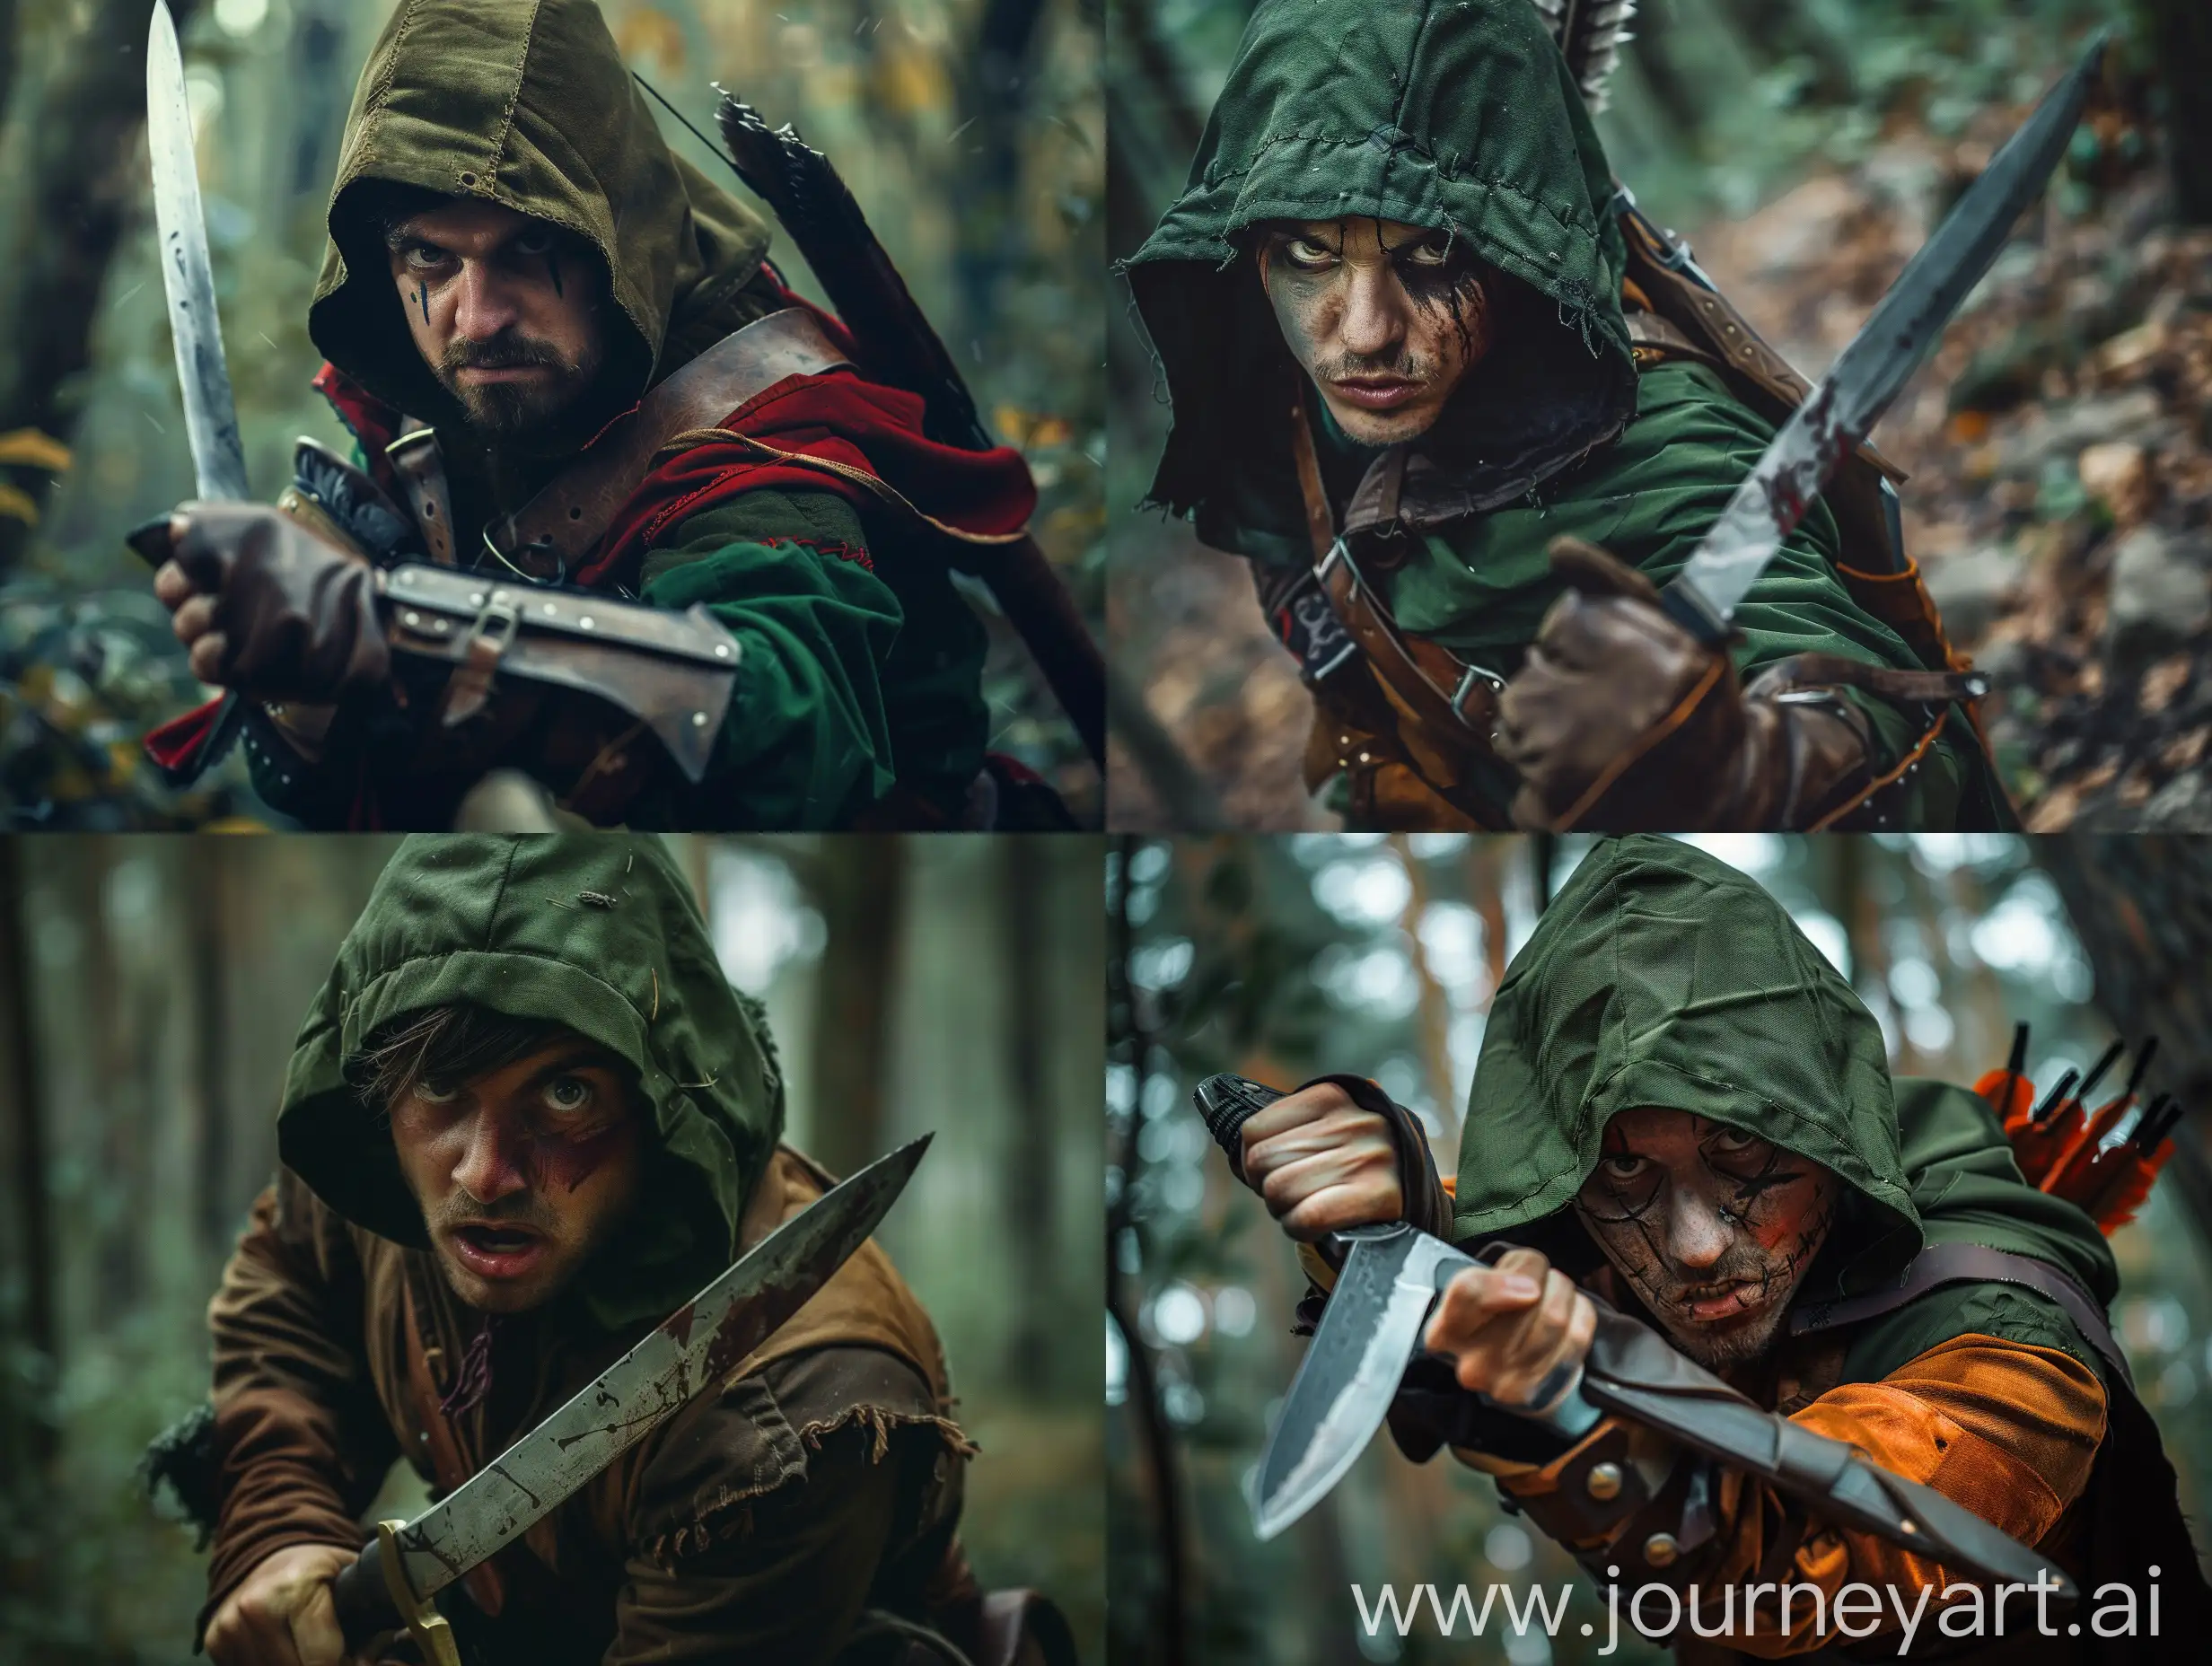 A killer hunter dressed like Robin Hood with a knife in his hand. Fierce face. Searching the forest.